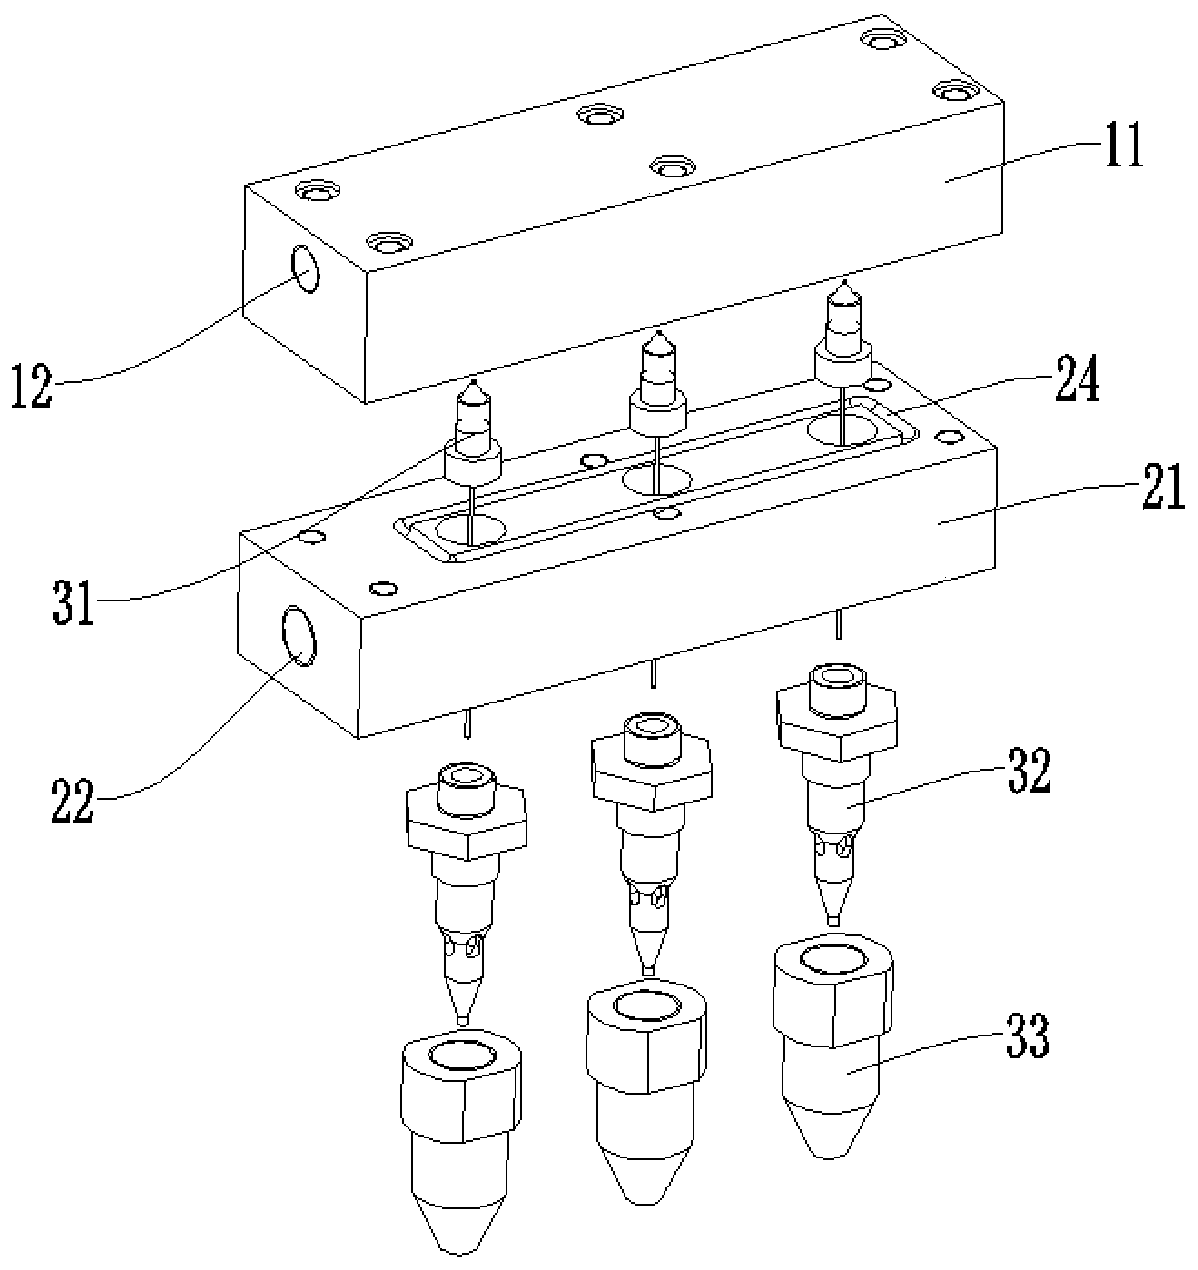 Array type dry ice spray head and gas-solid mixture generation method